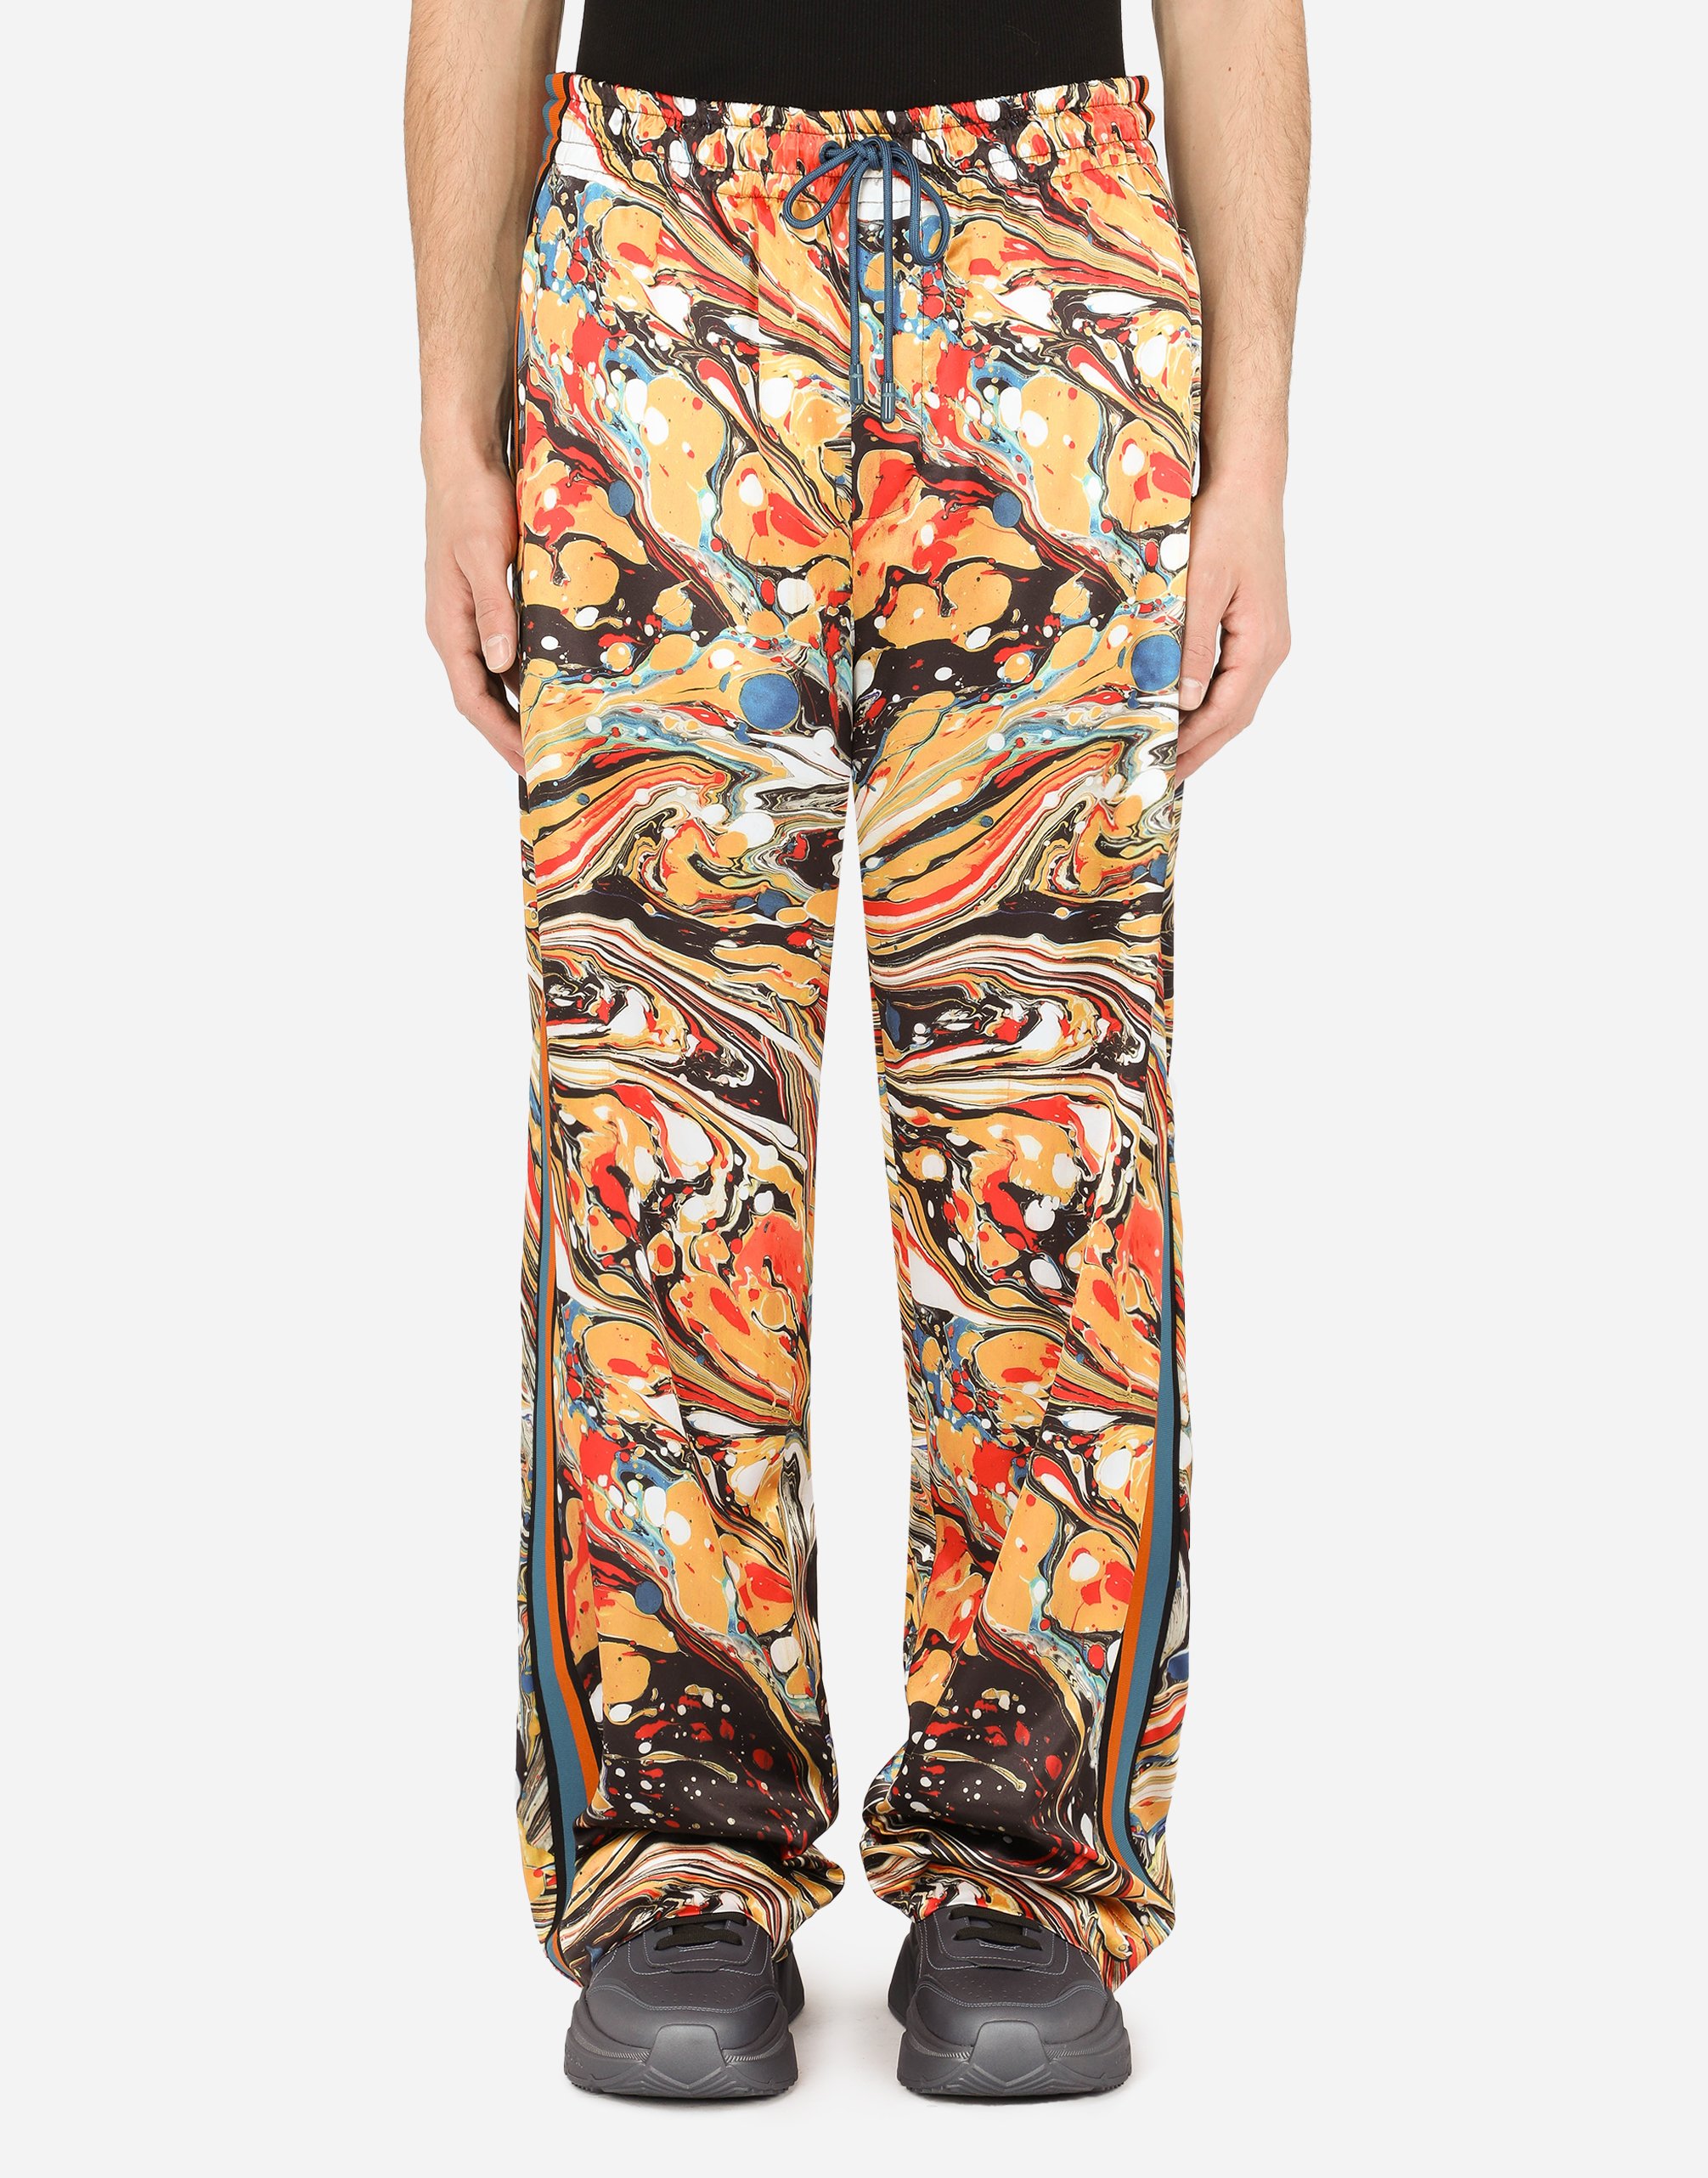 DOLCE & GABBANA SATIN JOGGING PANTS WITH BLUE MARBLED PRINT